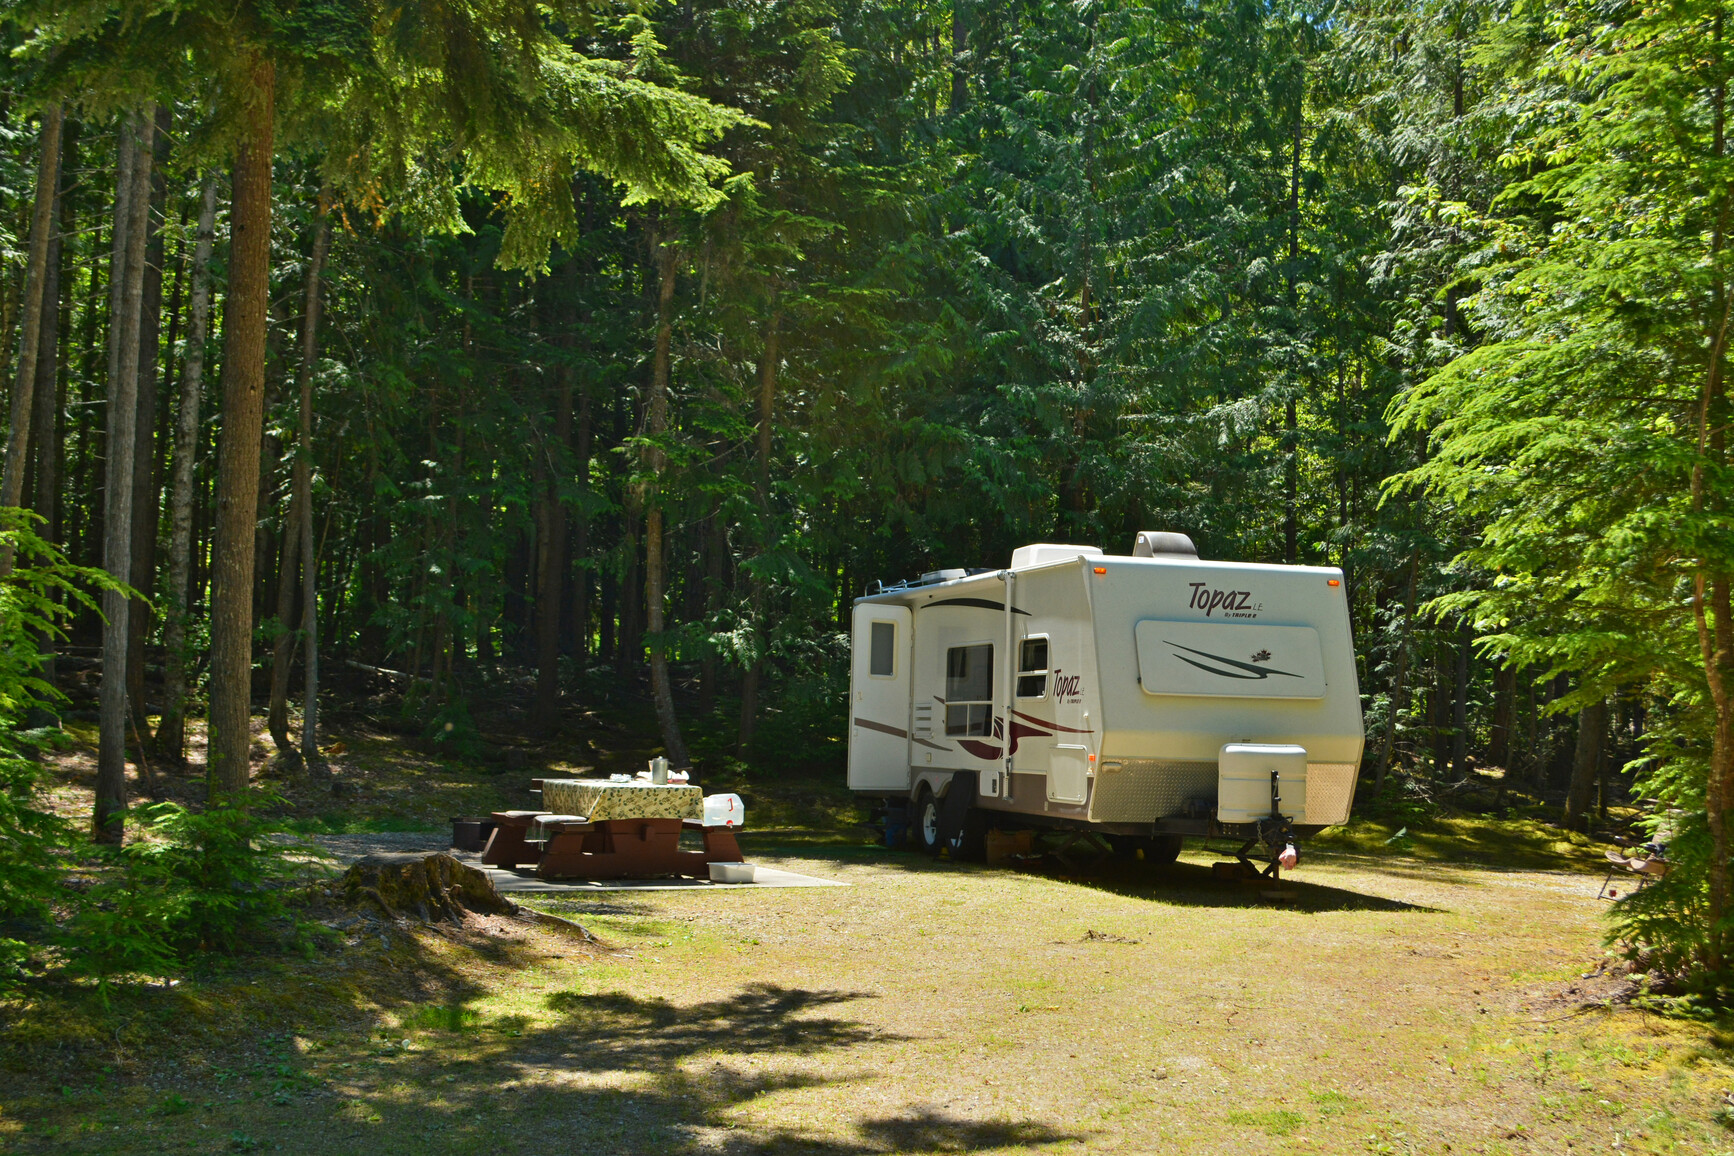 McDonald Creek Park - A campsite with a picnic table, fire ring and trailer. Trees and forest surround the campsite.